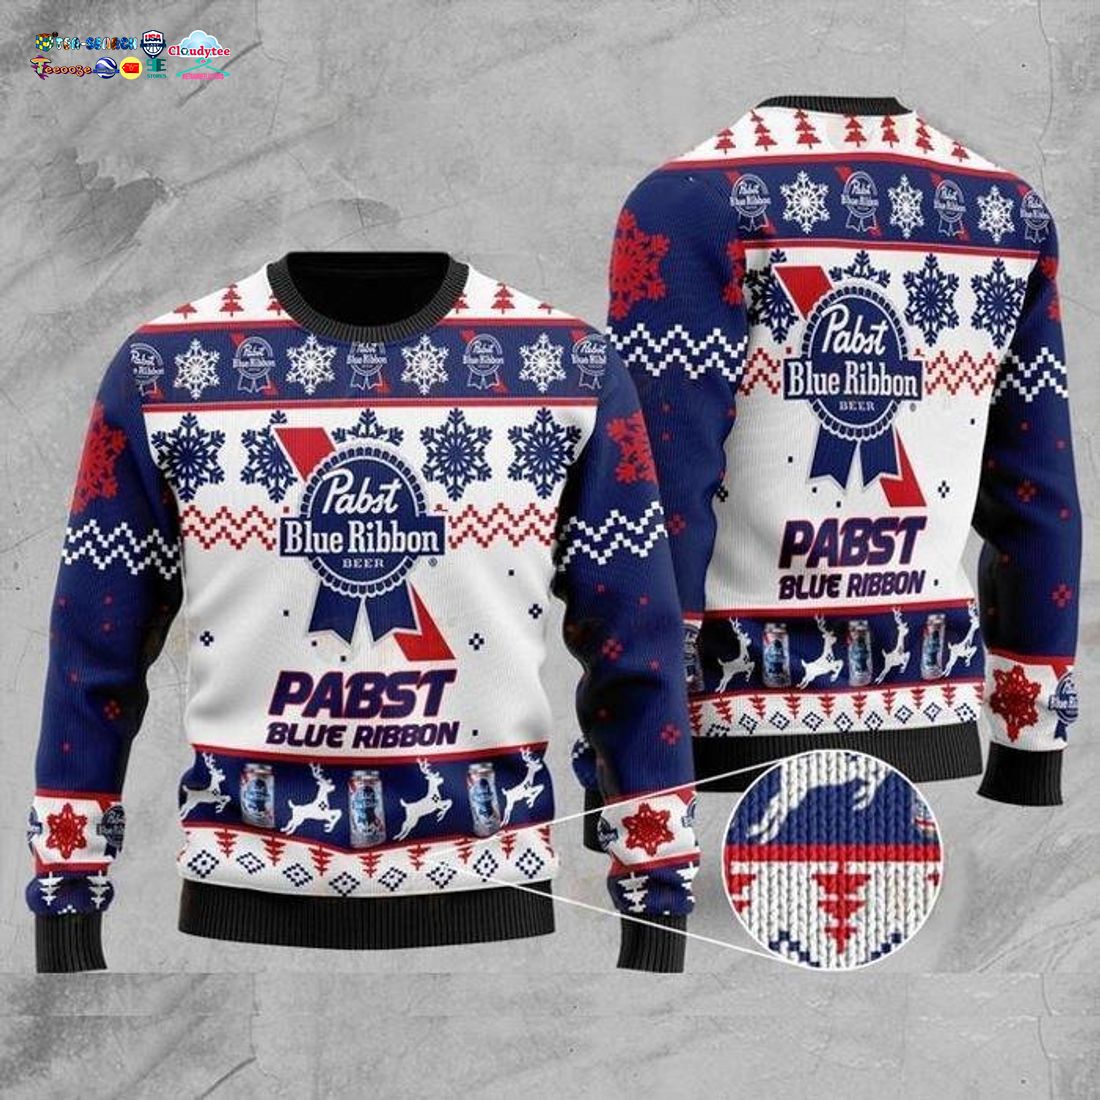 Pabst Blue Ribbon Ver 2 Ugly Christmas Sweater - Stand easy bro